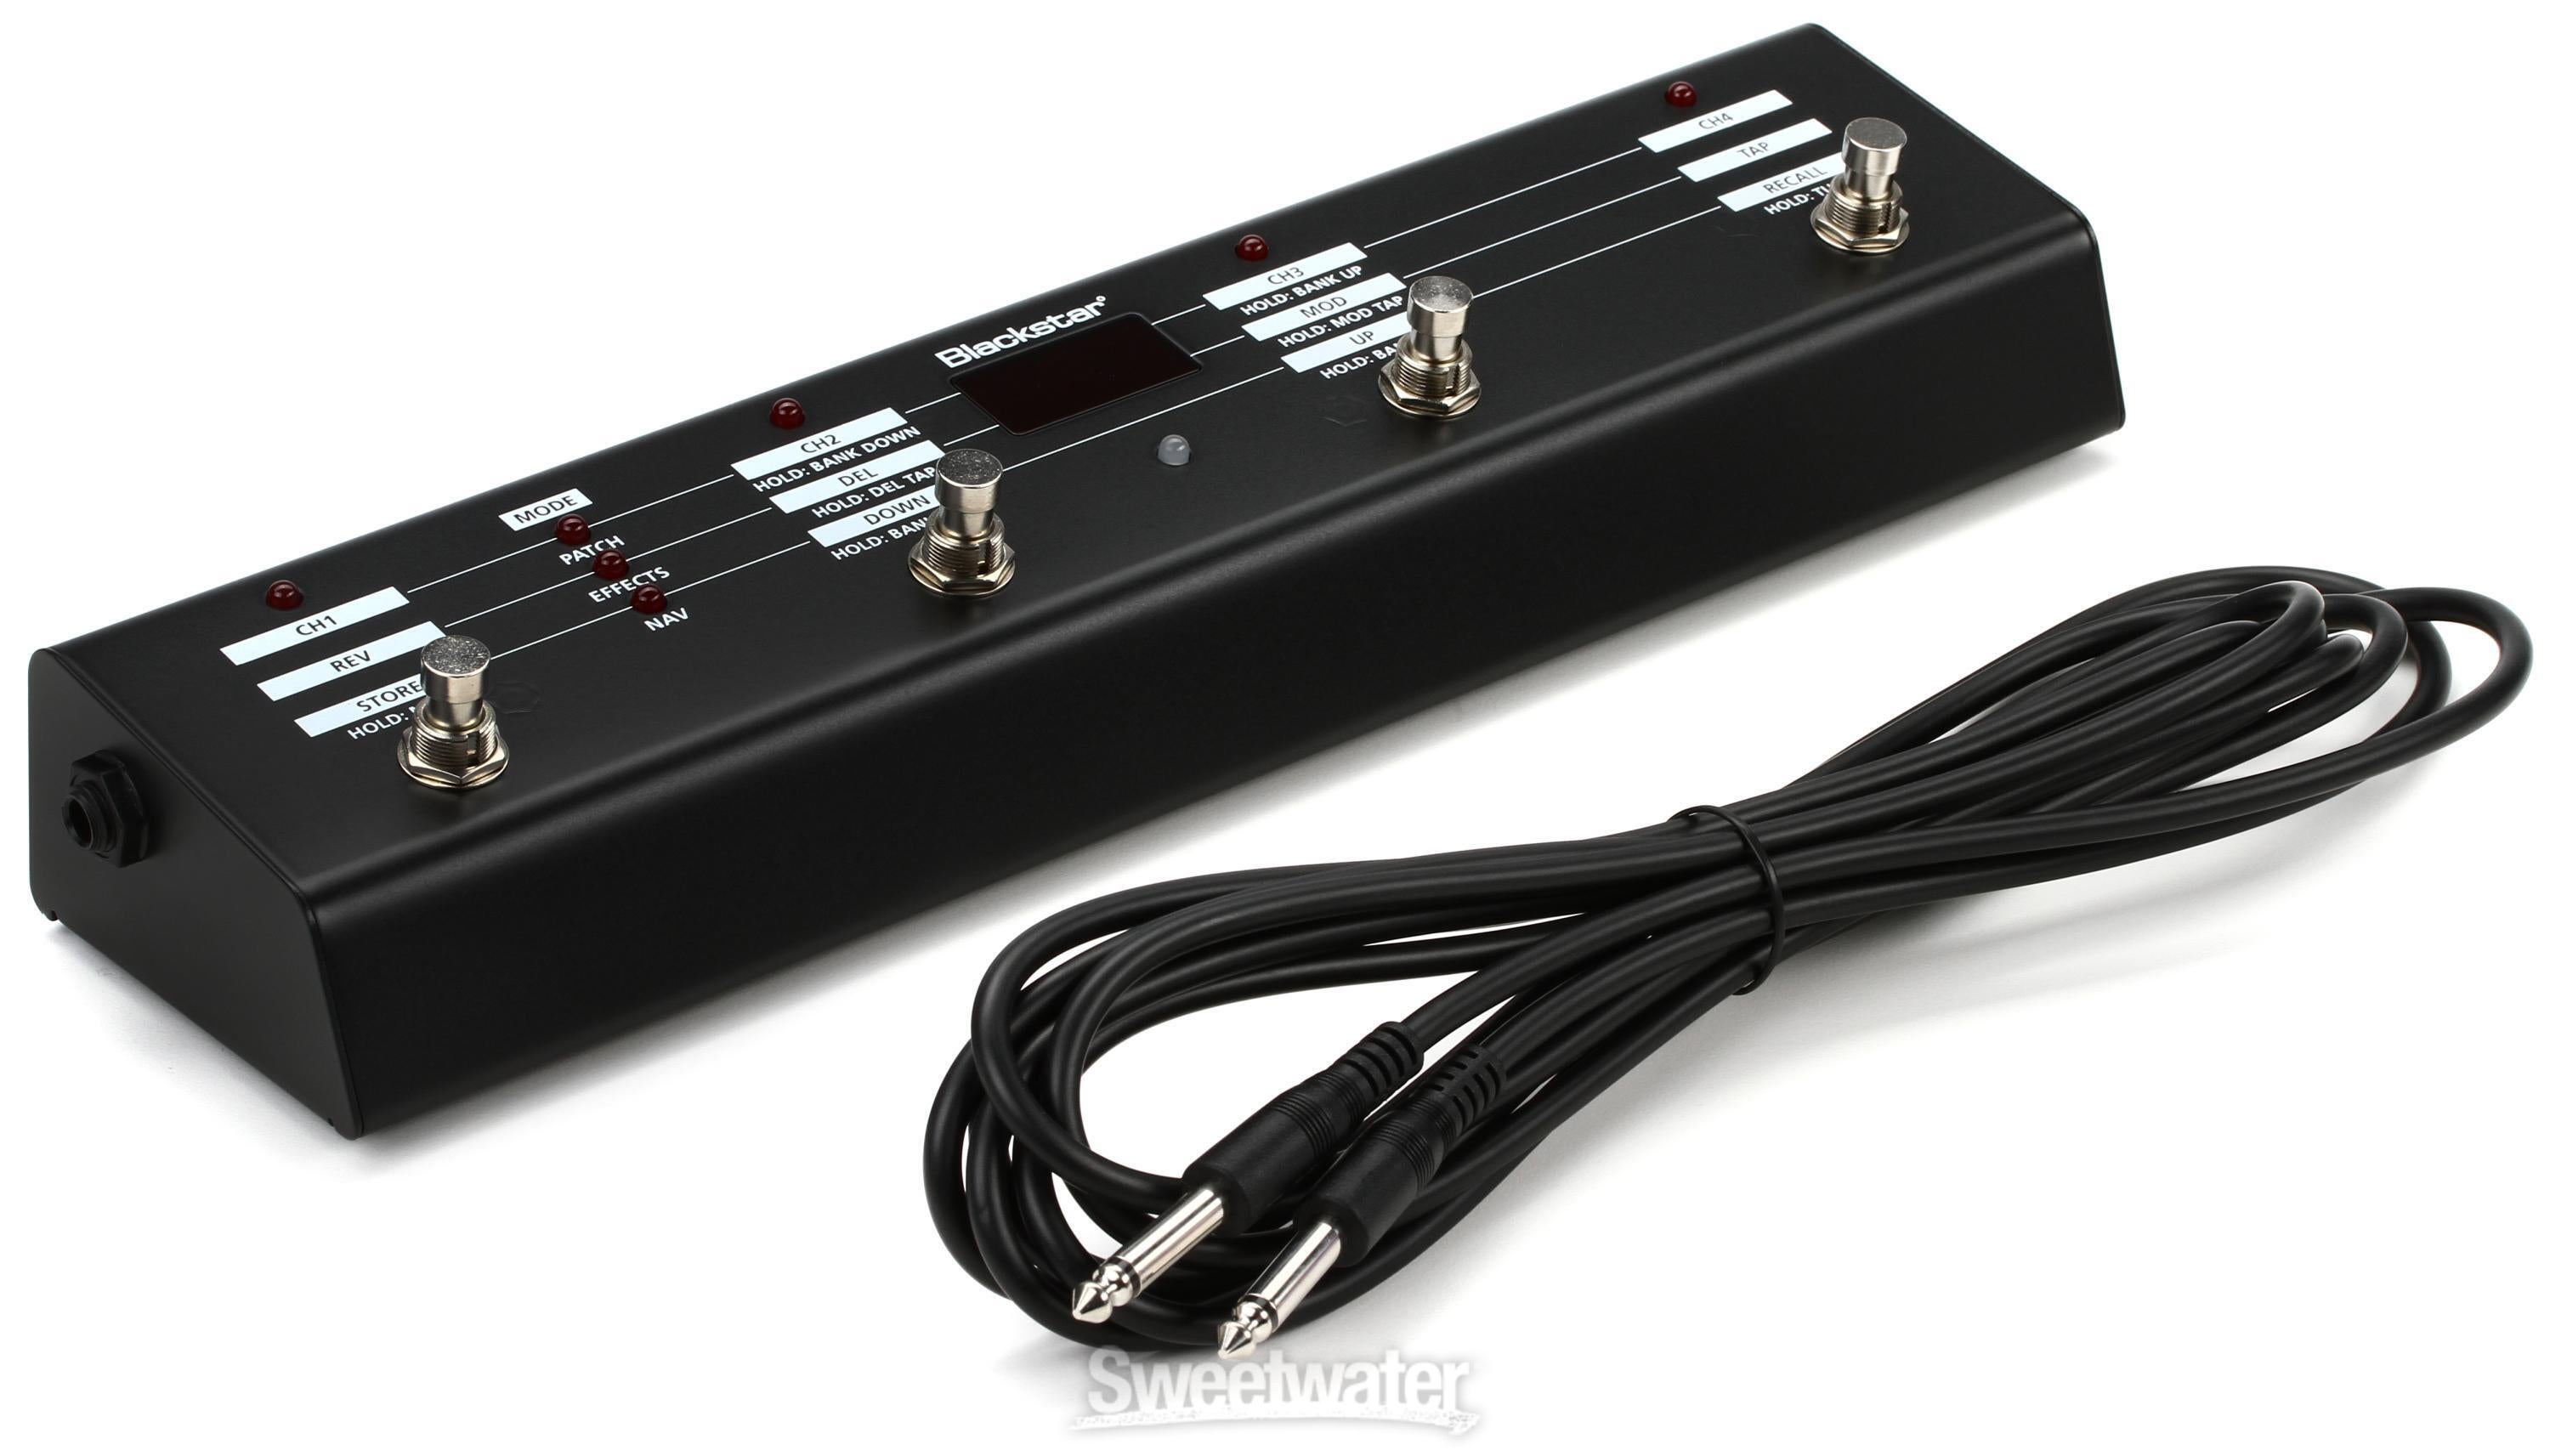 Footswitch　Amps　ID　Blackstar　Sweetwater　for　FS-10　Multi-function　Series